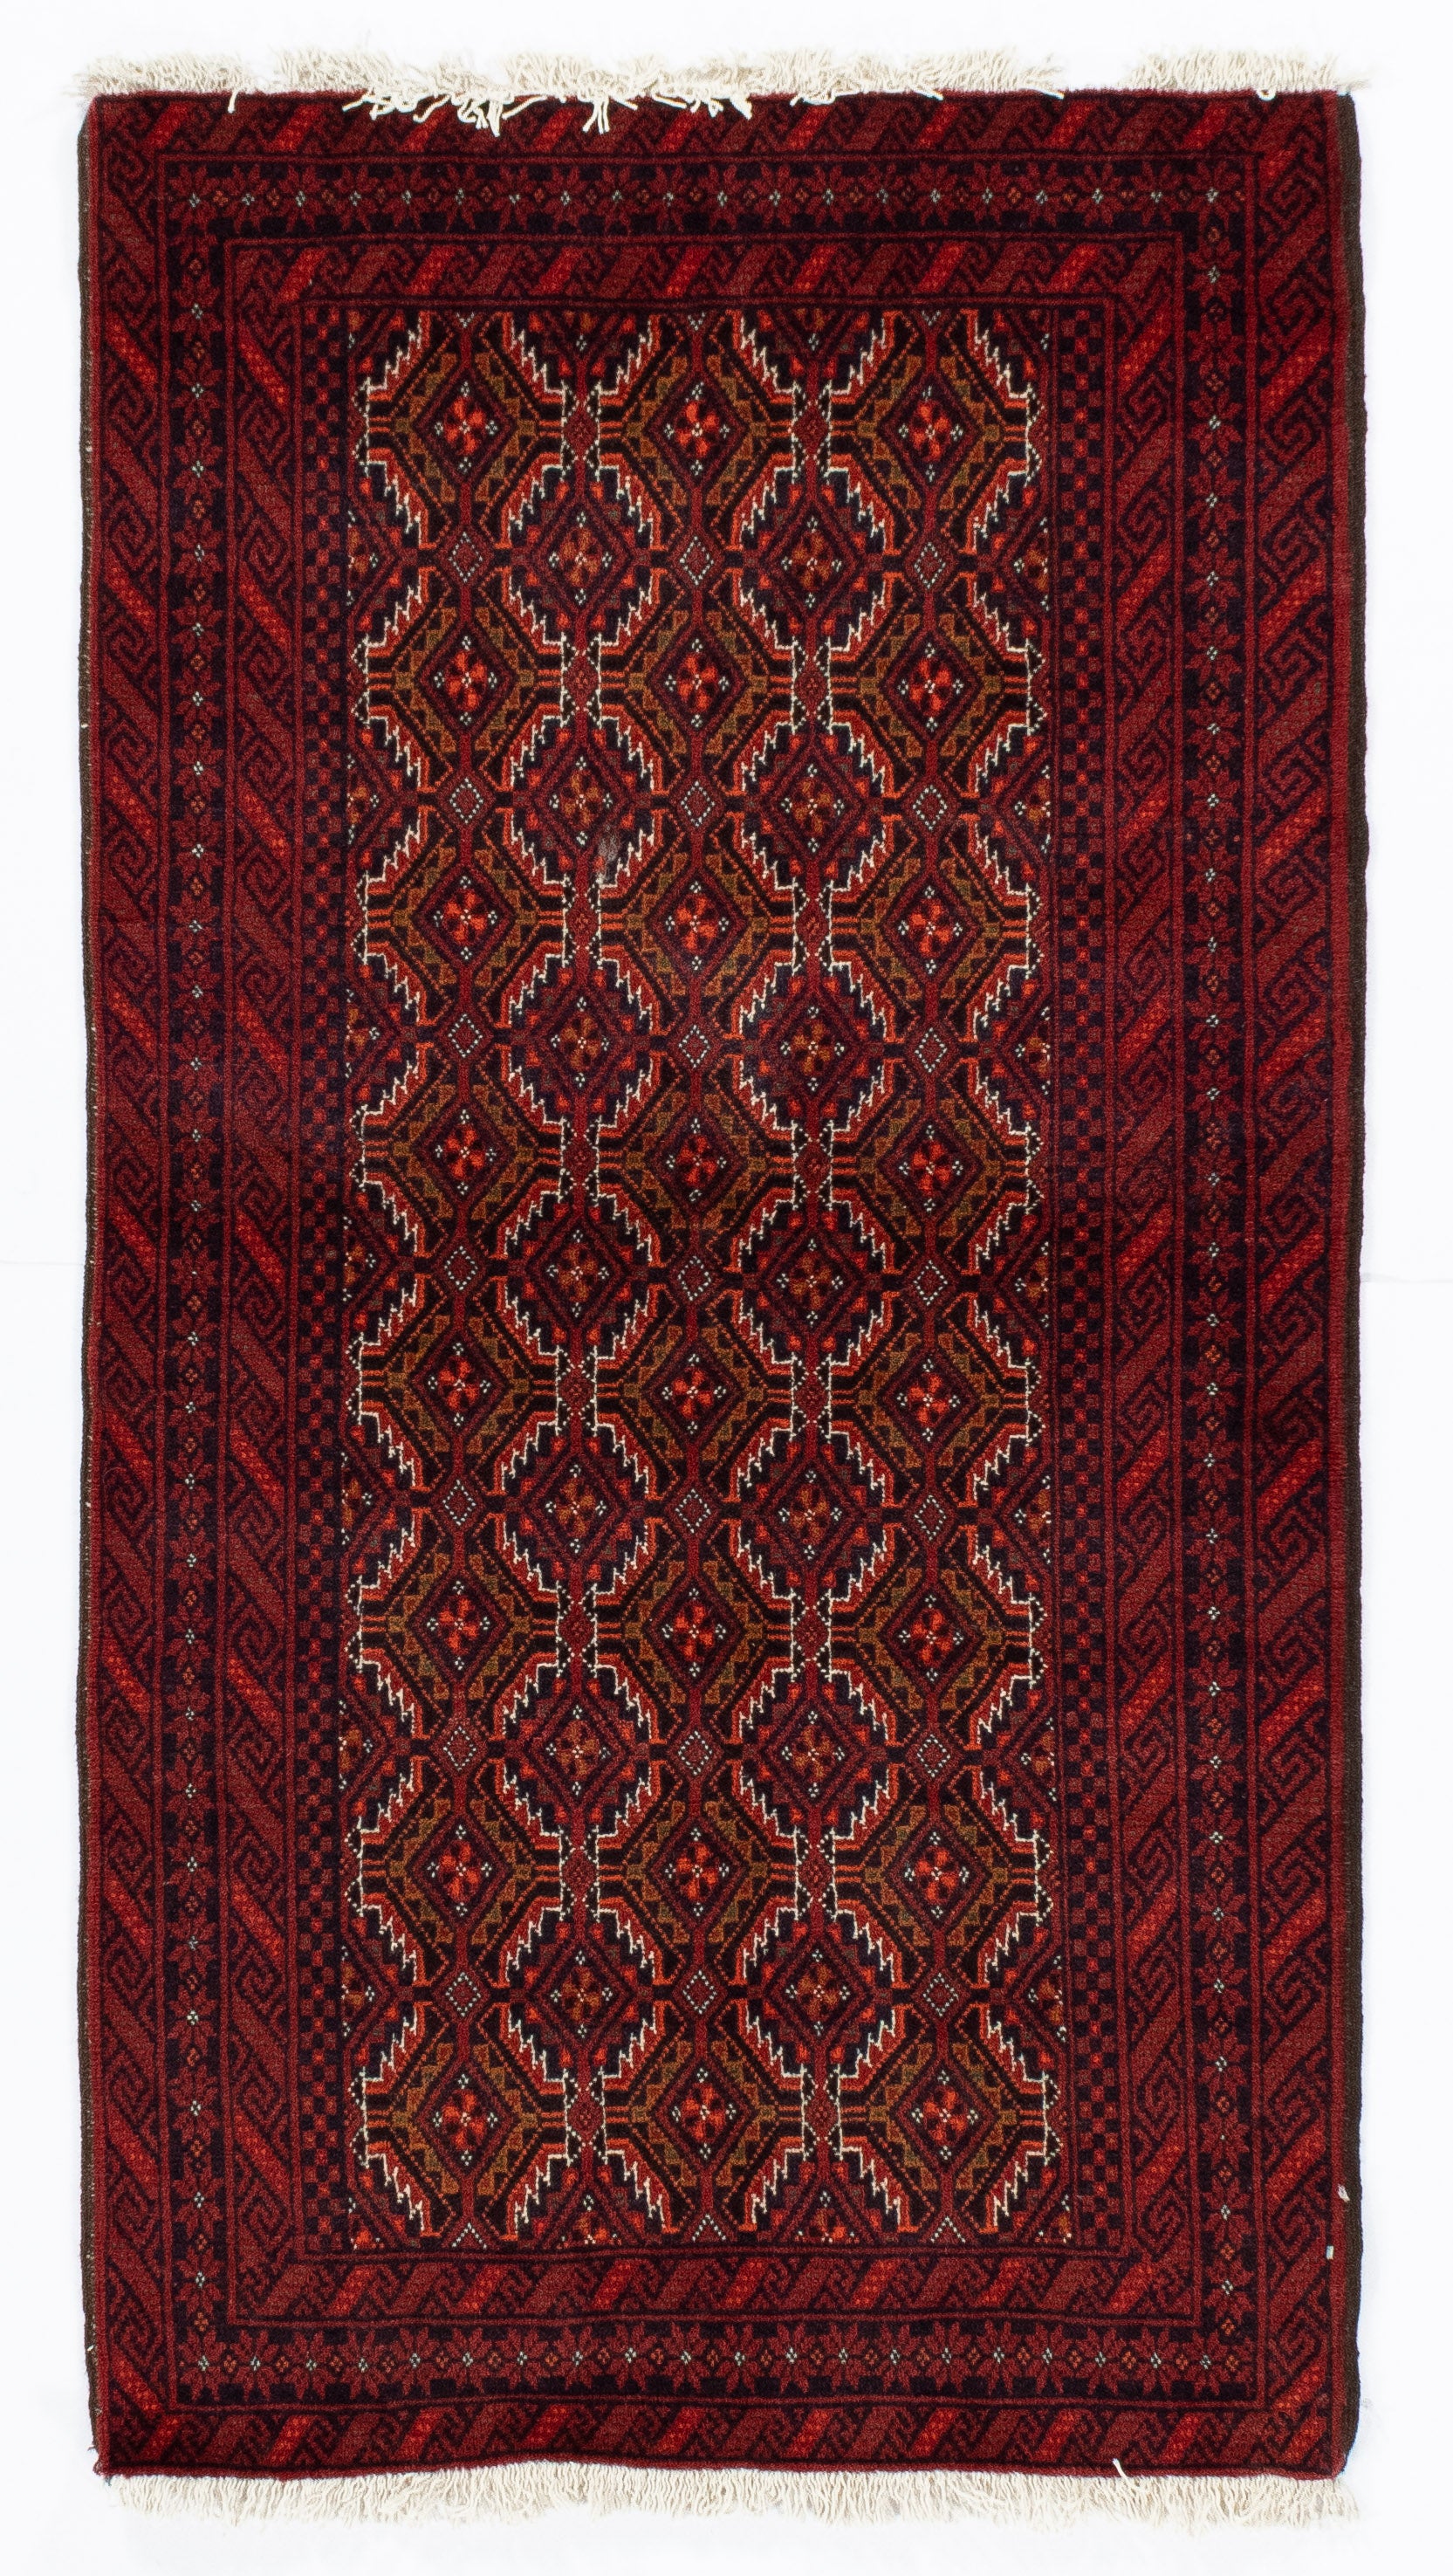 New Persian Balouch Rug <br> 3' 2 x 5' 9